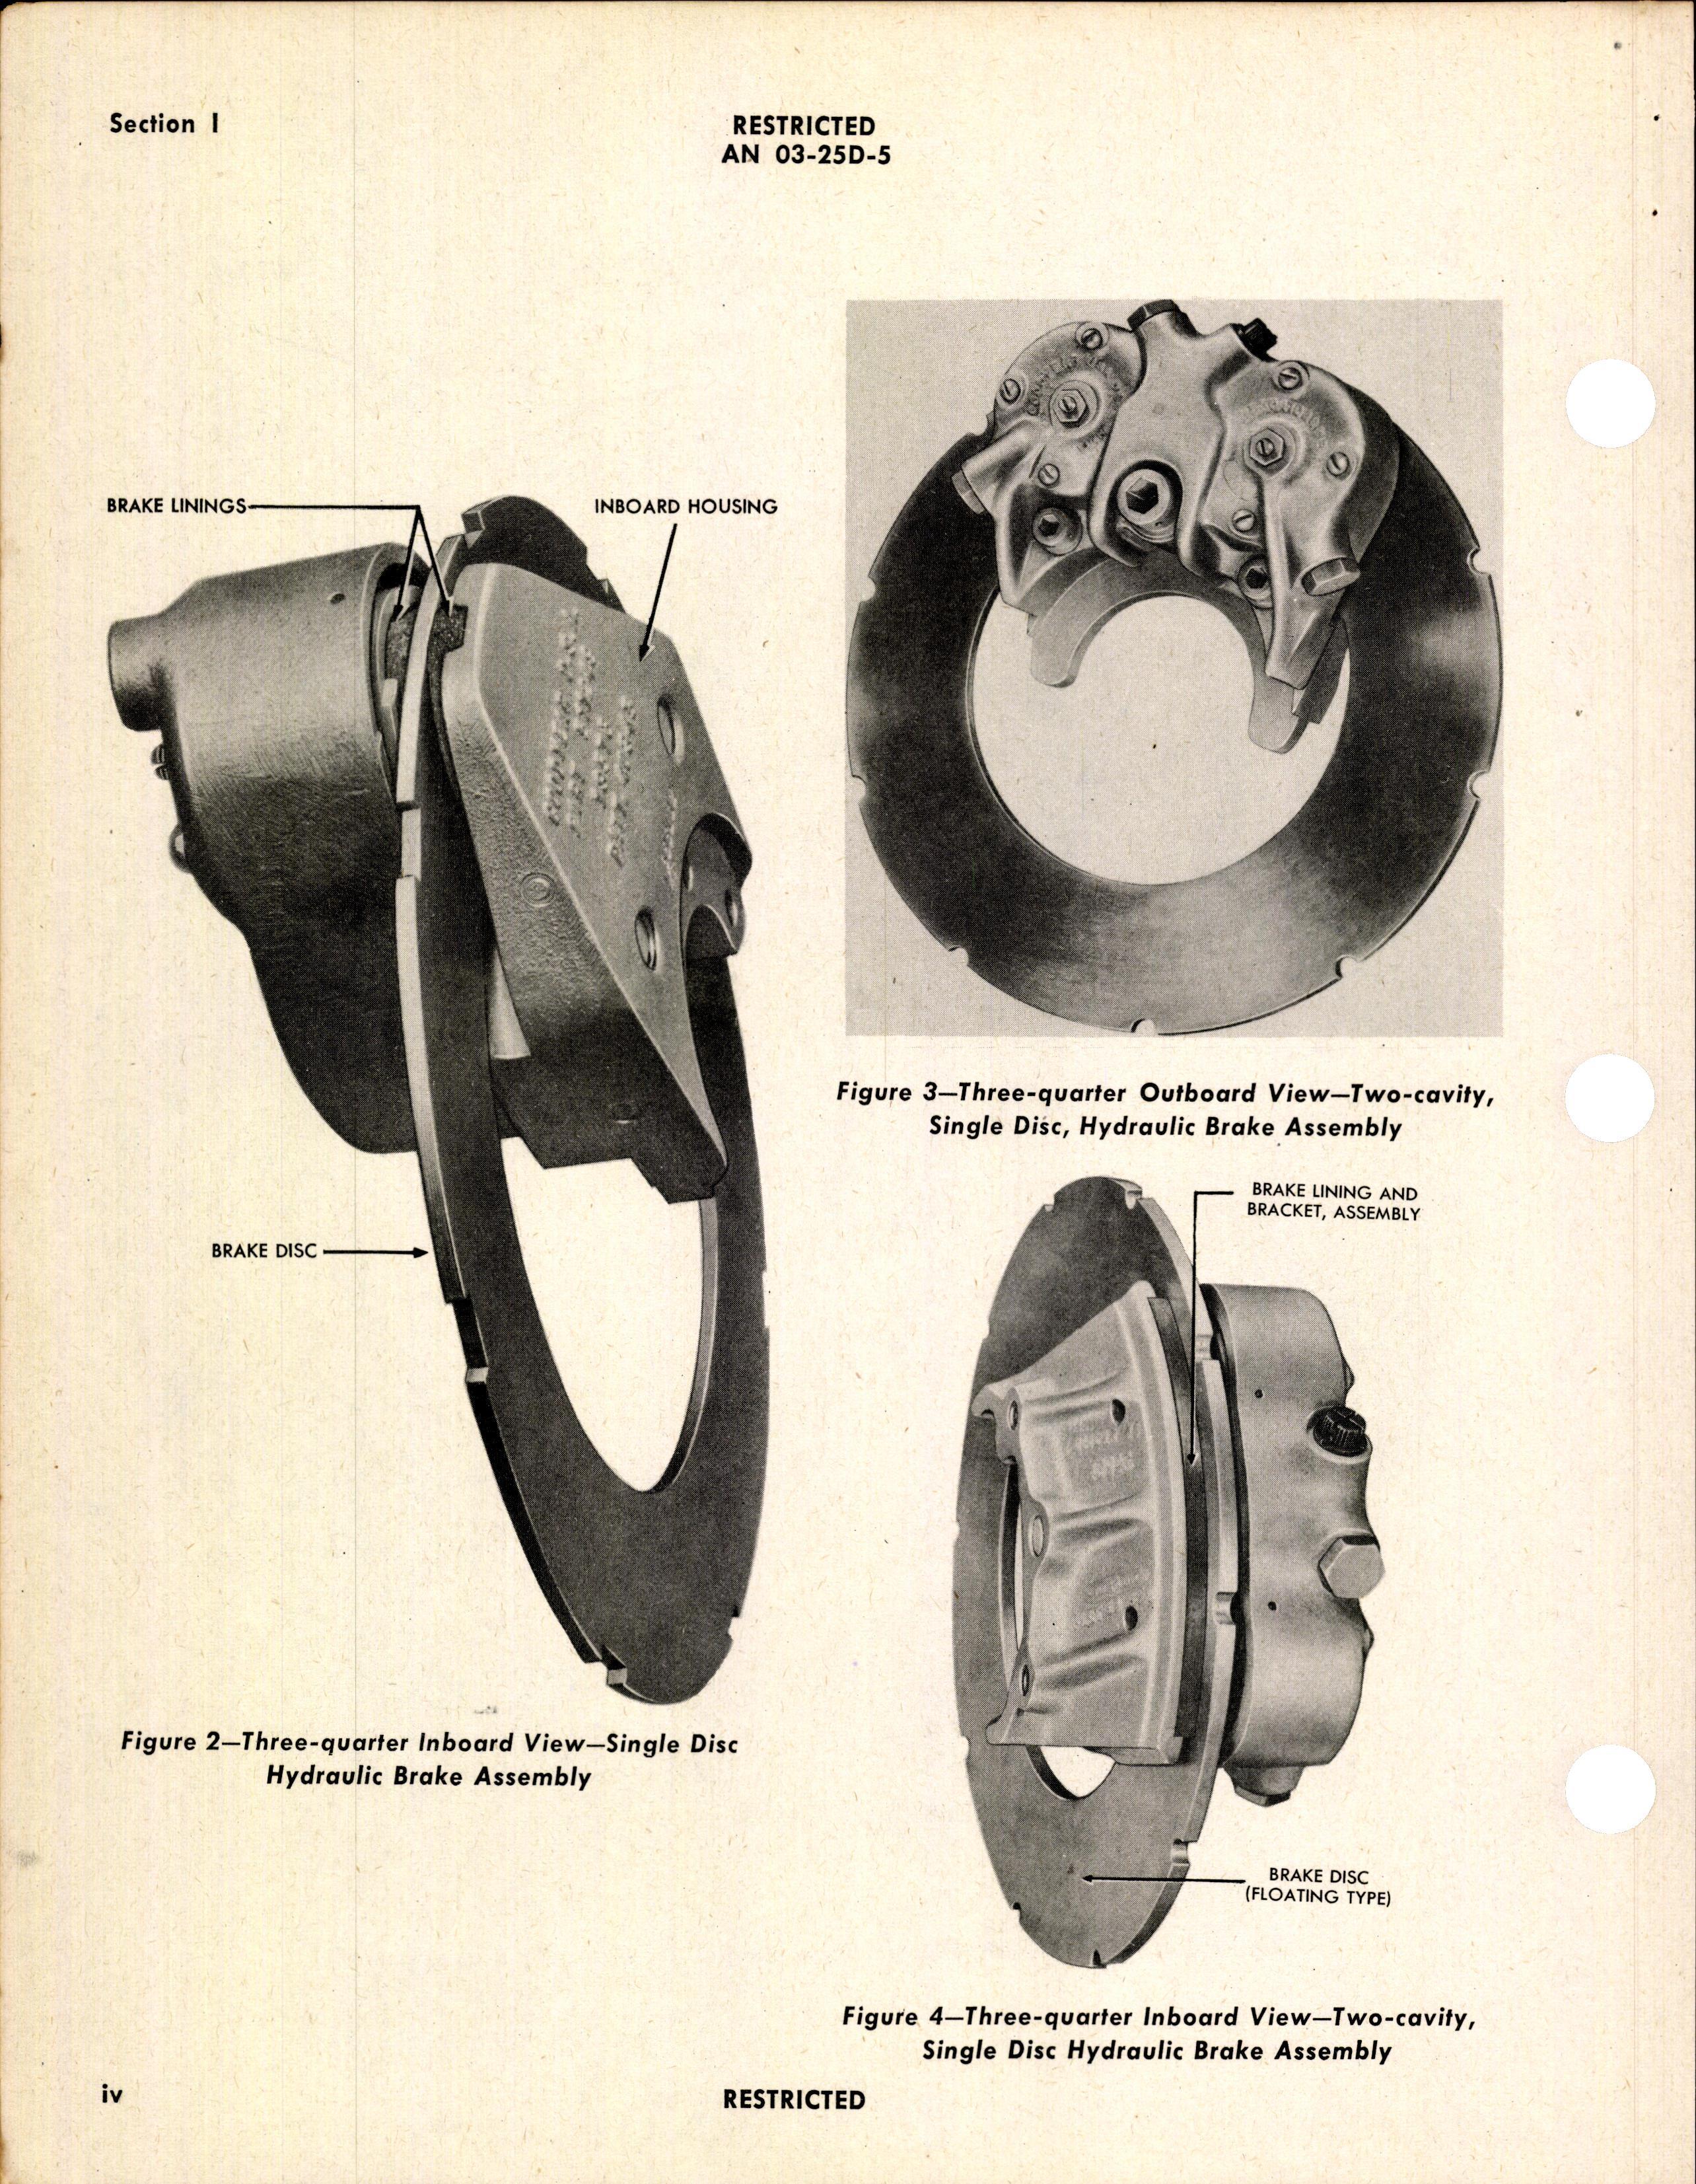 Sample page 6 from AirCorps Library document: Operation, Service, & Overhaul Instructions with Parts Catalog for Goodyear Single Disc Brakes